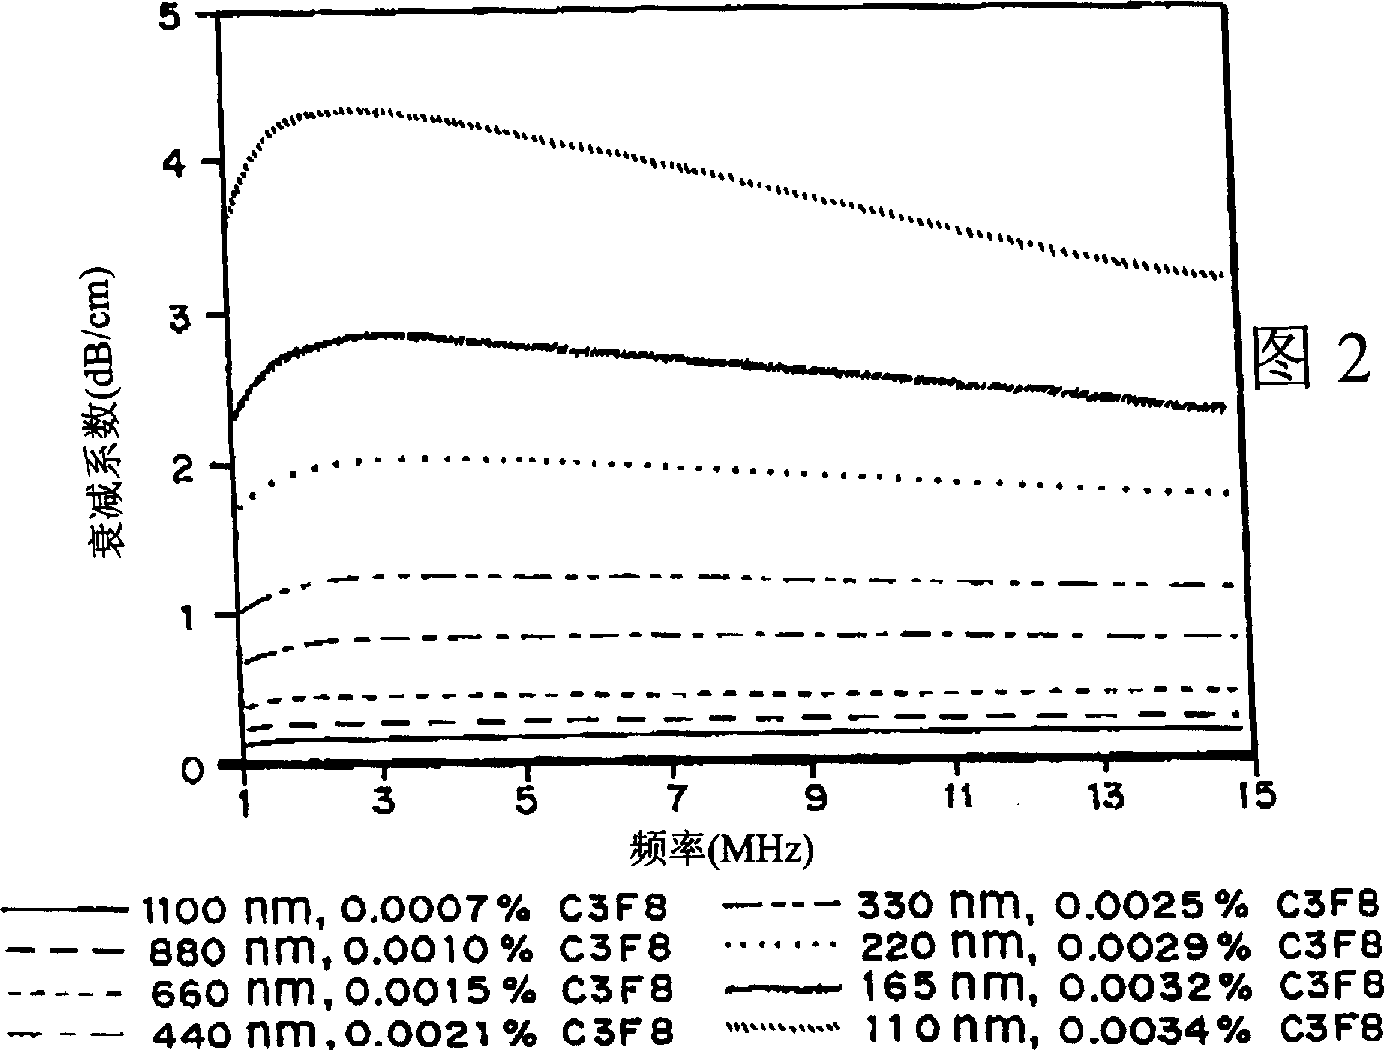 Method for enhancing echogenicity and decreasing attenuation of microencapsulated gases